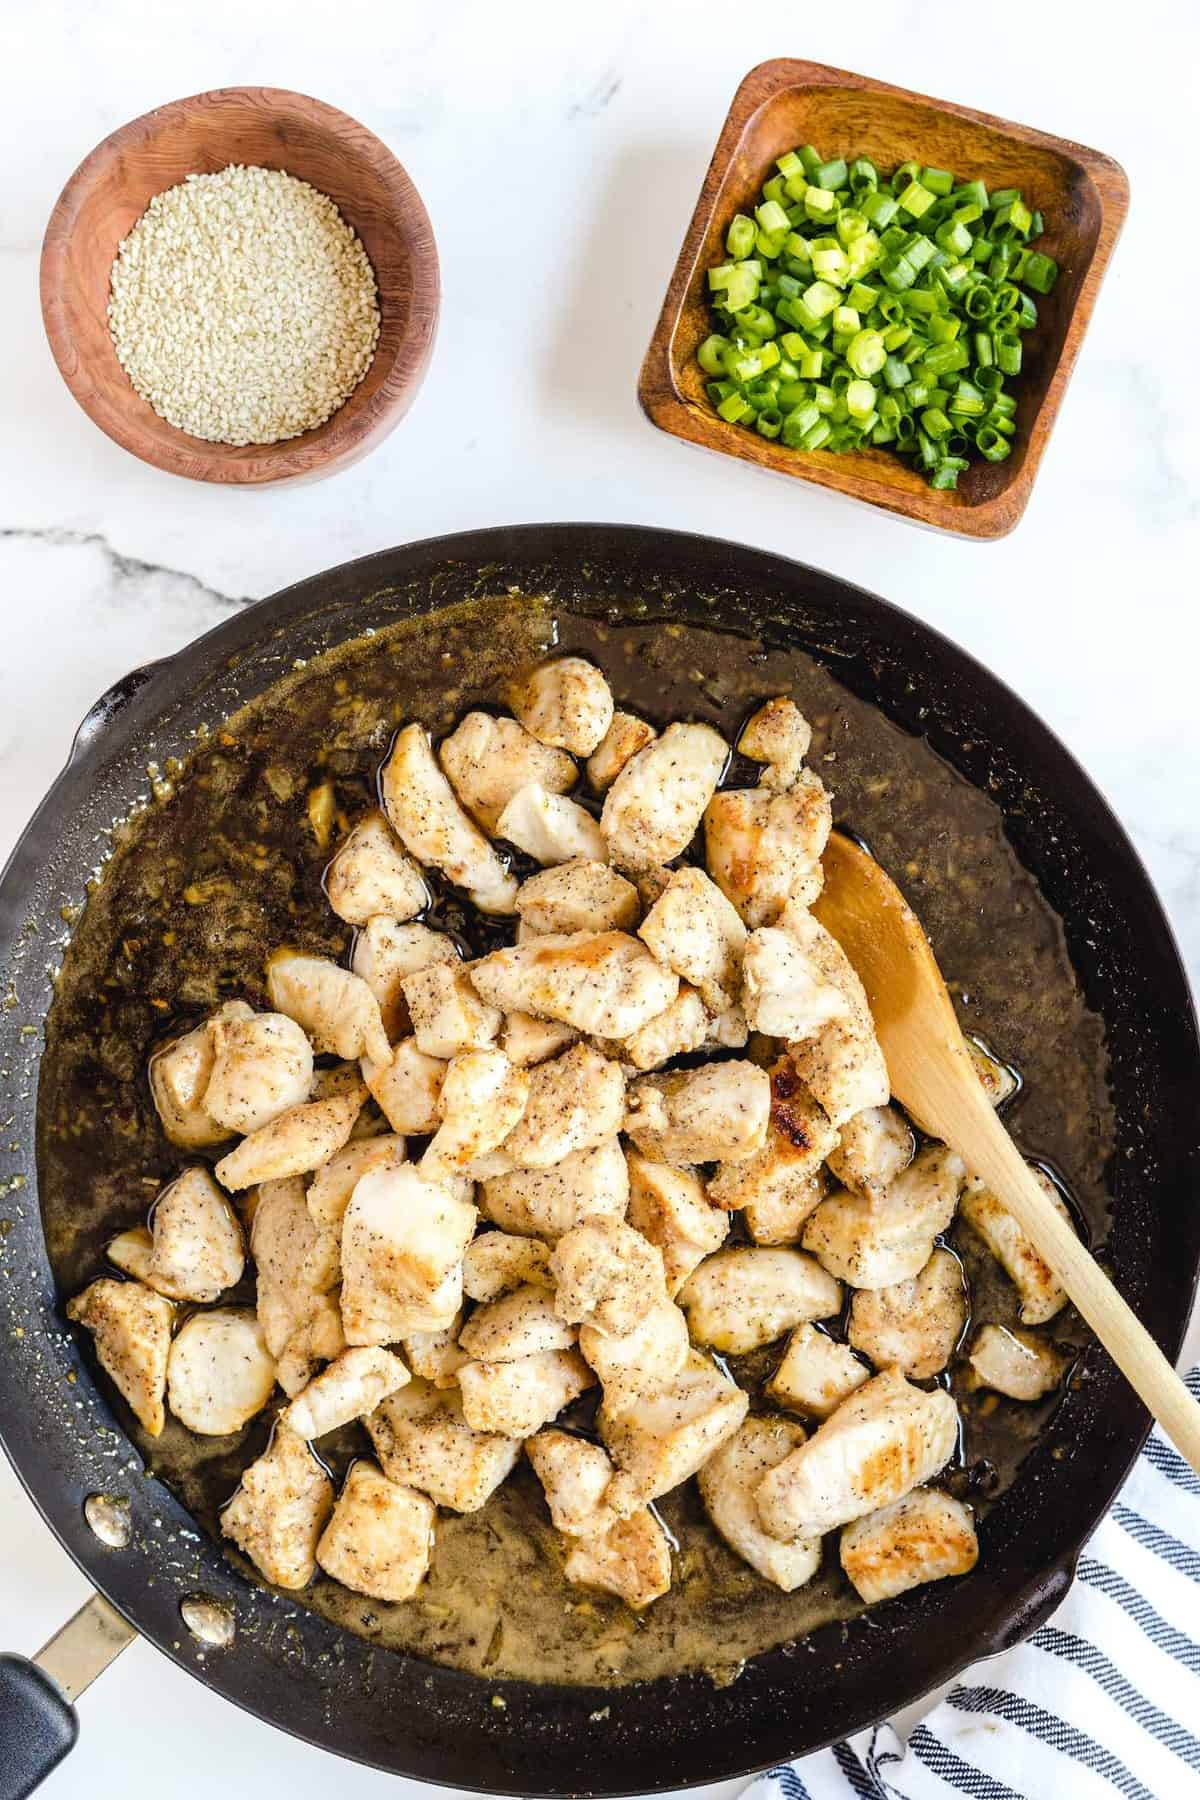 add the chicken to the pan